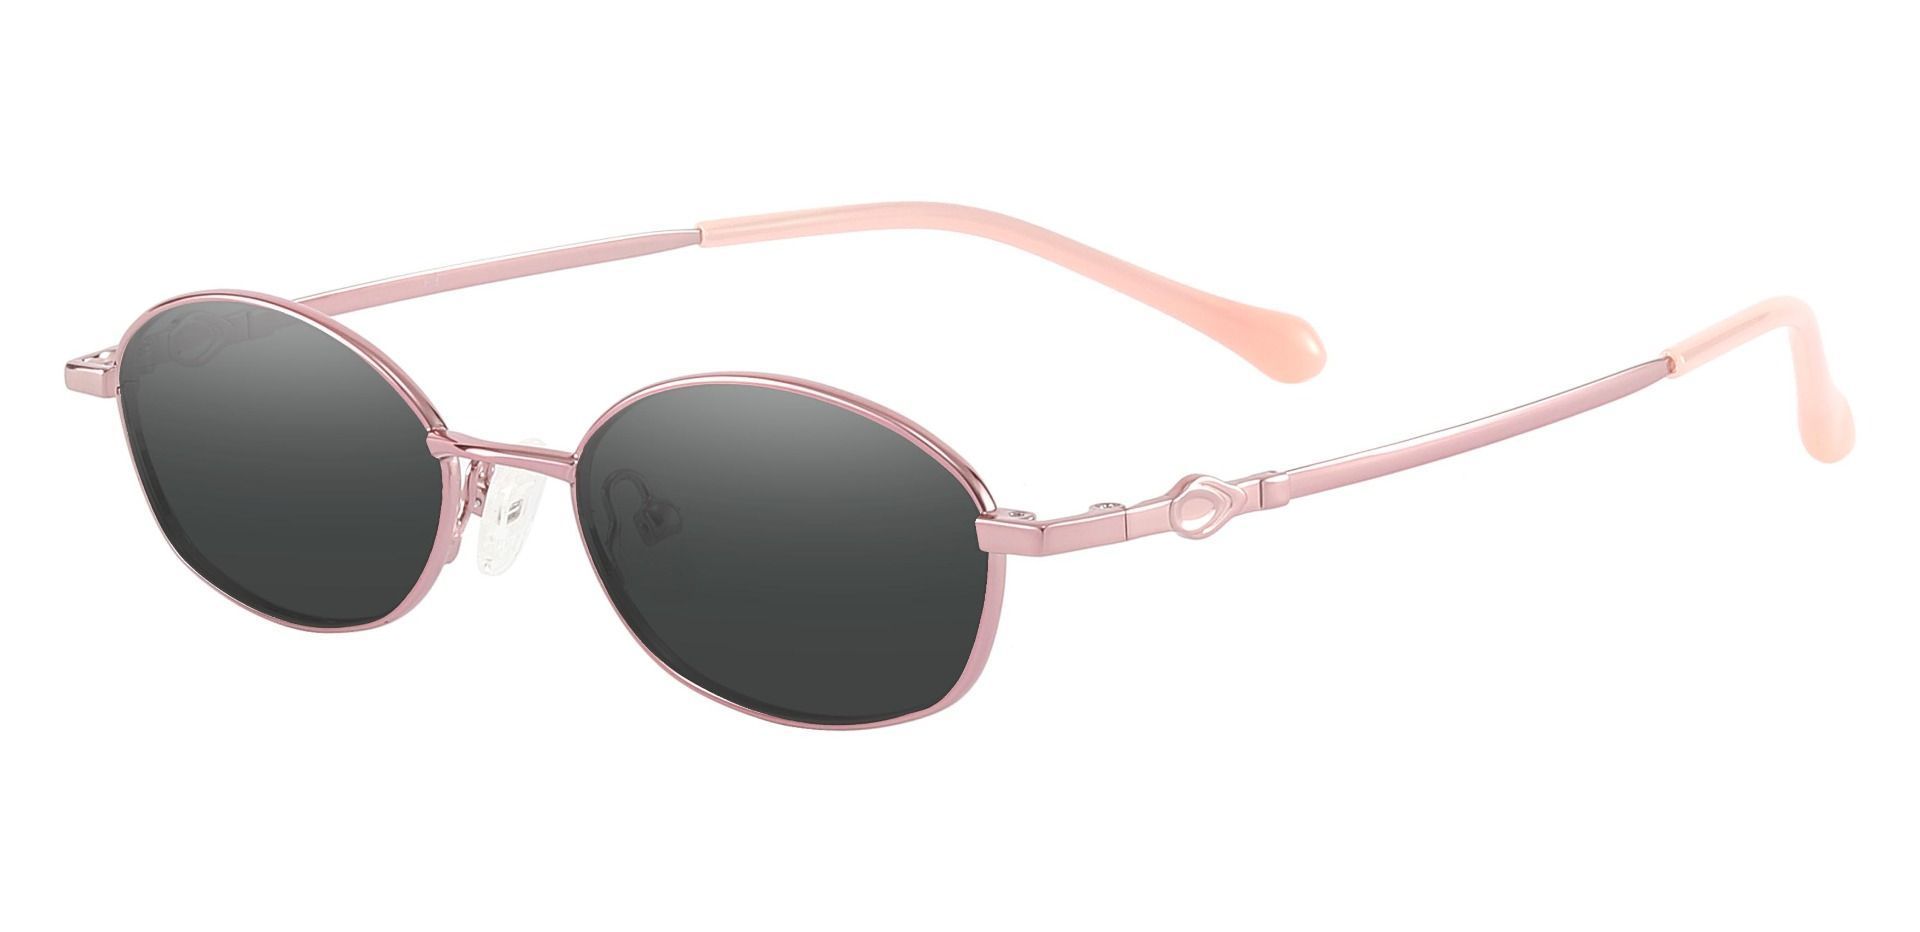 Fletcher Oval Non-Rx Sunglasses - Pink Frame With Gray Lenses